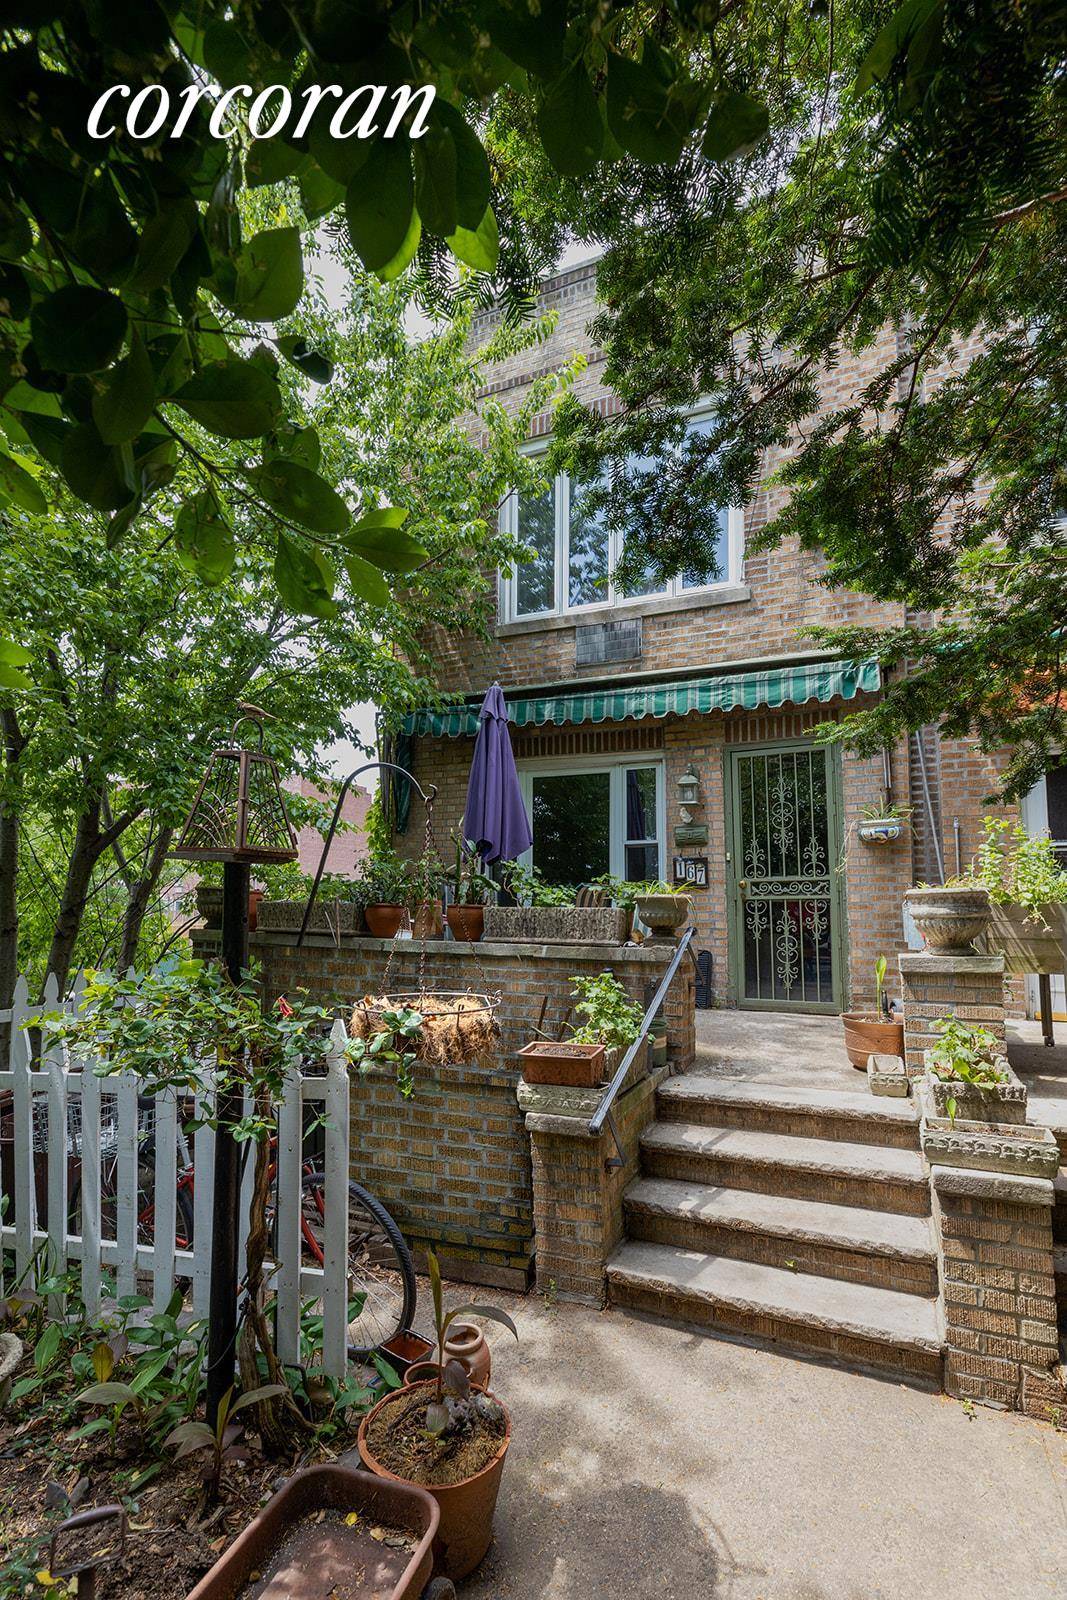 A WINDSOR TERRACE CLASSIC Built around 1925, 167 Seeley Street is a single family, brick townhouse.